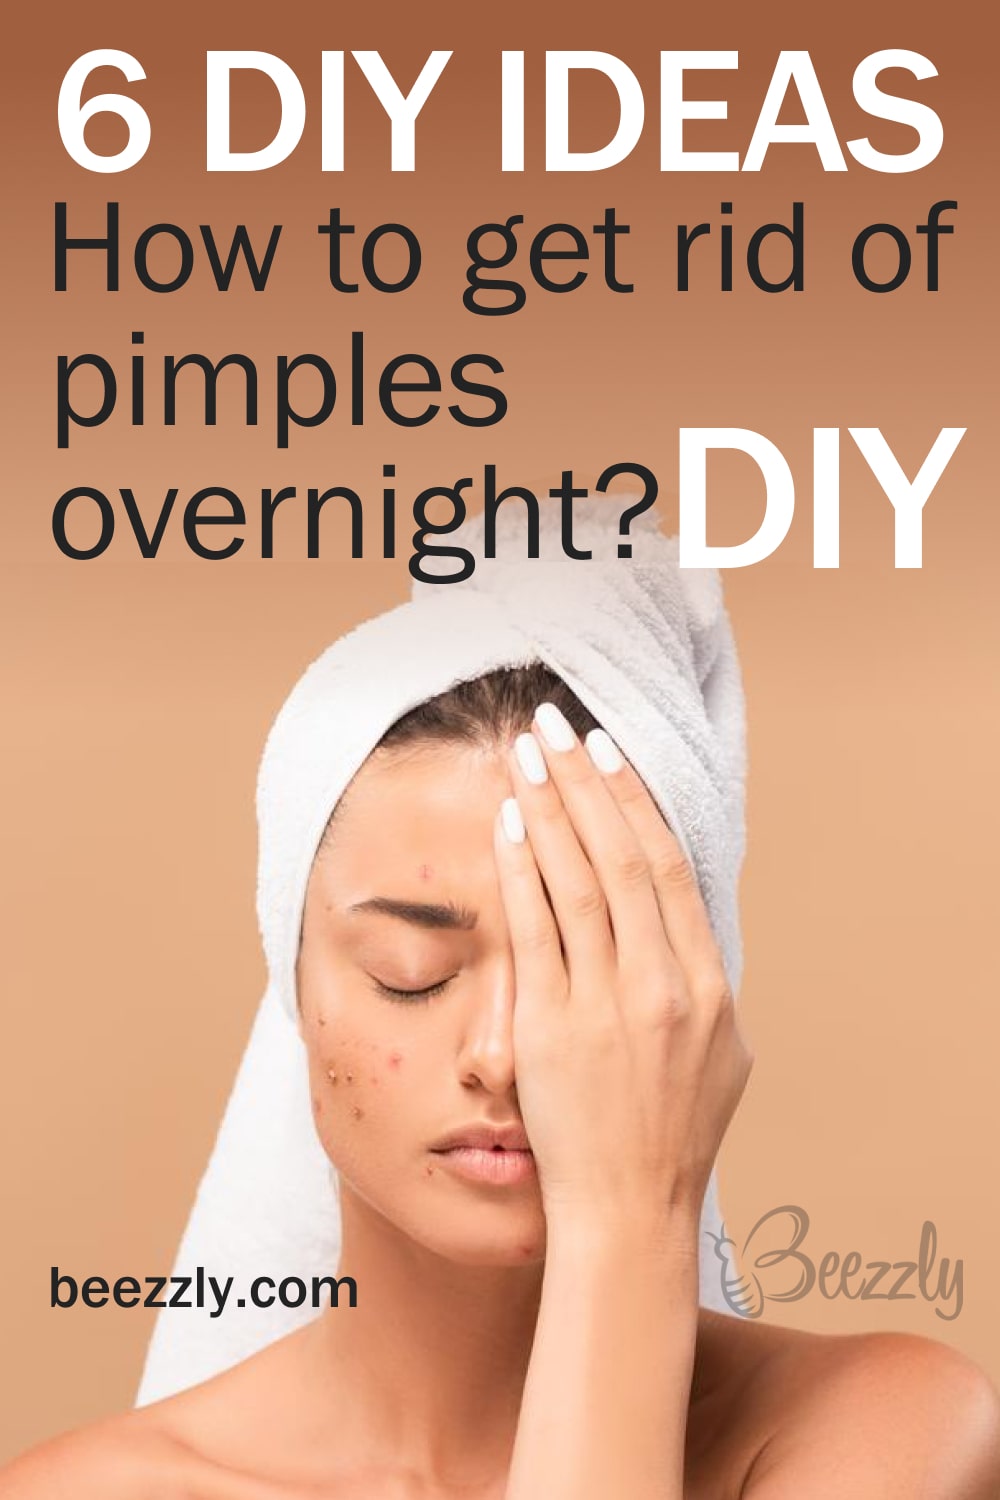 How to Get Rid of Pimples Overnight DIY